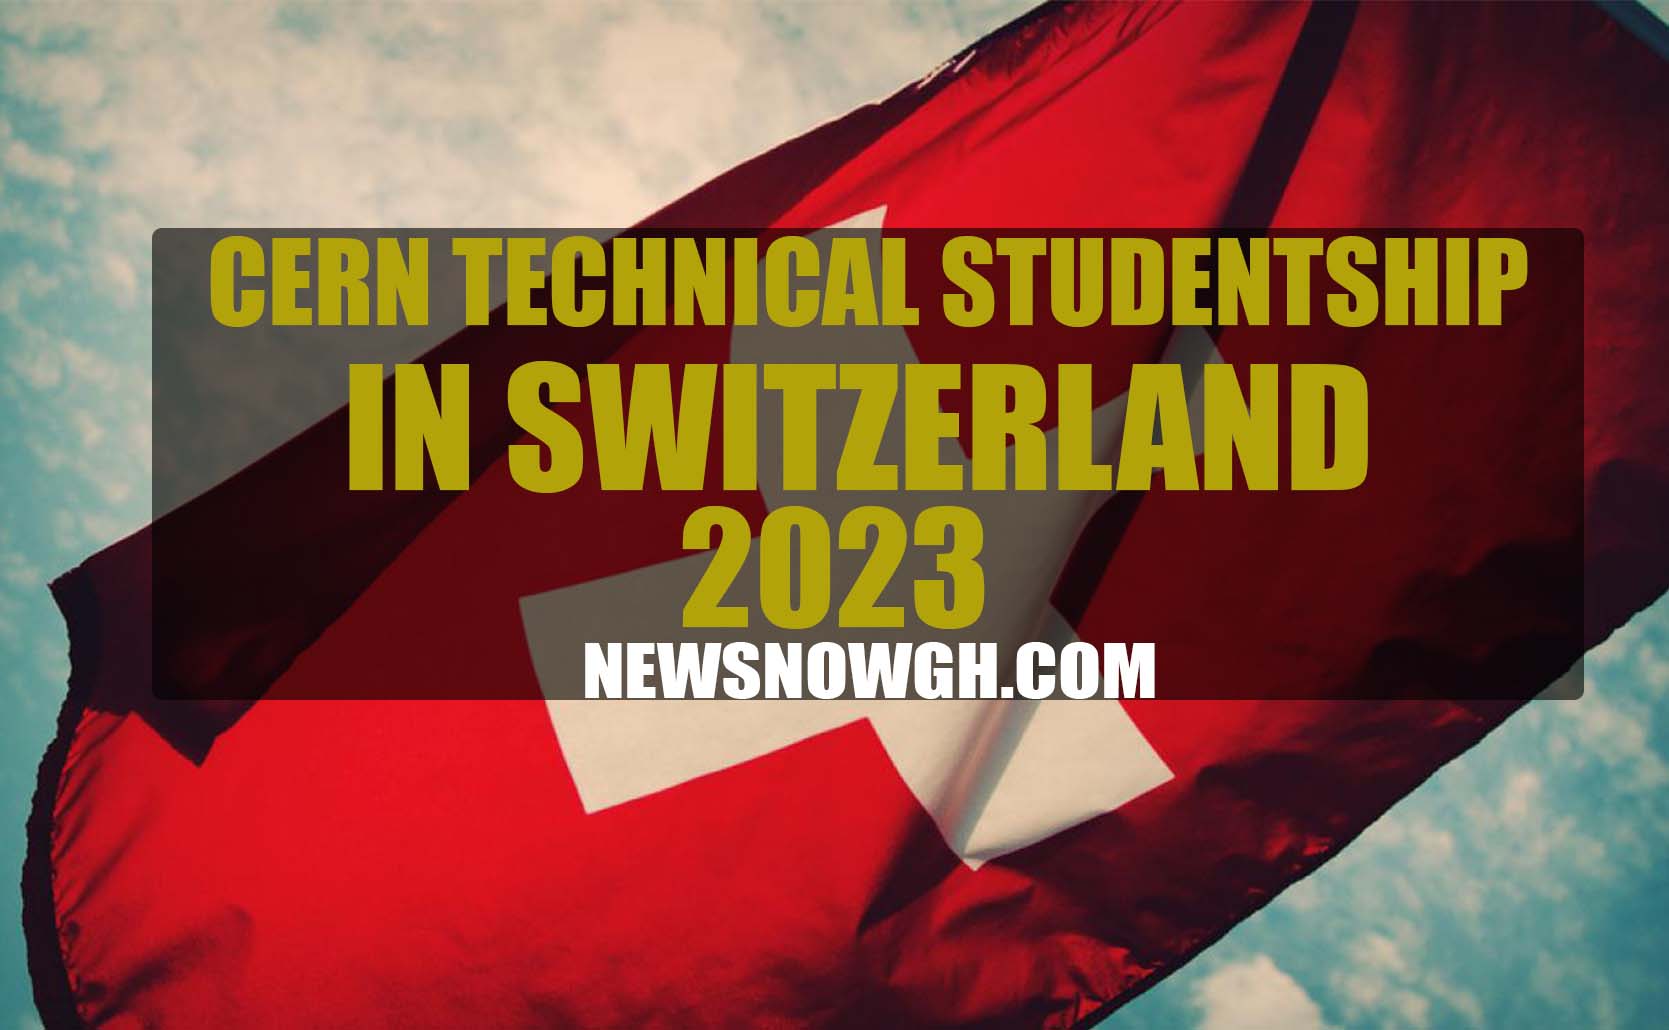 Switzerland 2023 CERN Technical Studentship (Fully Funded)